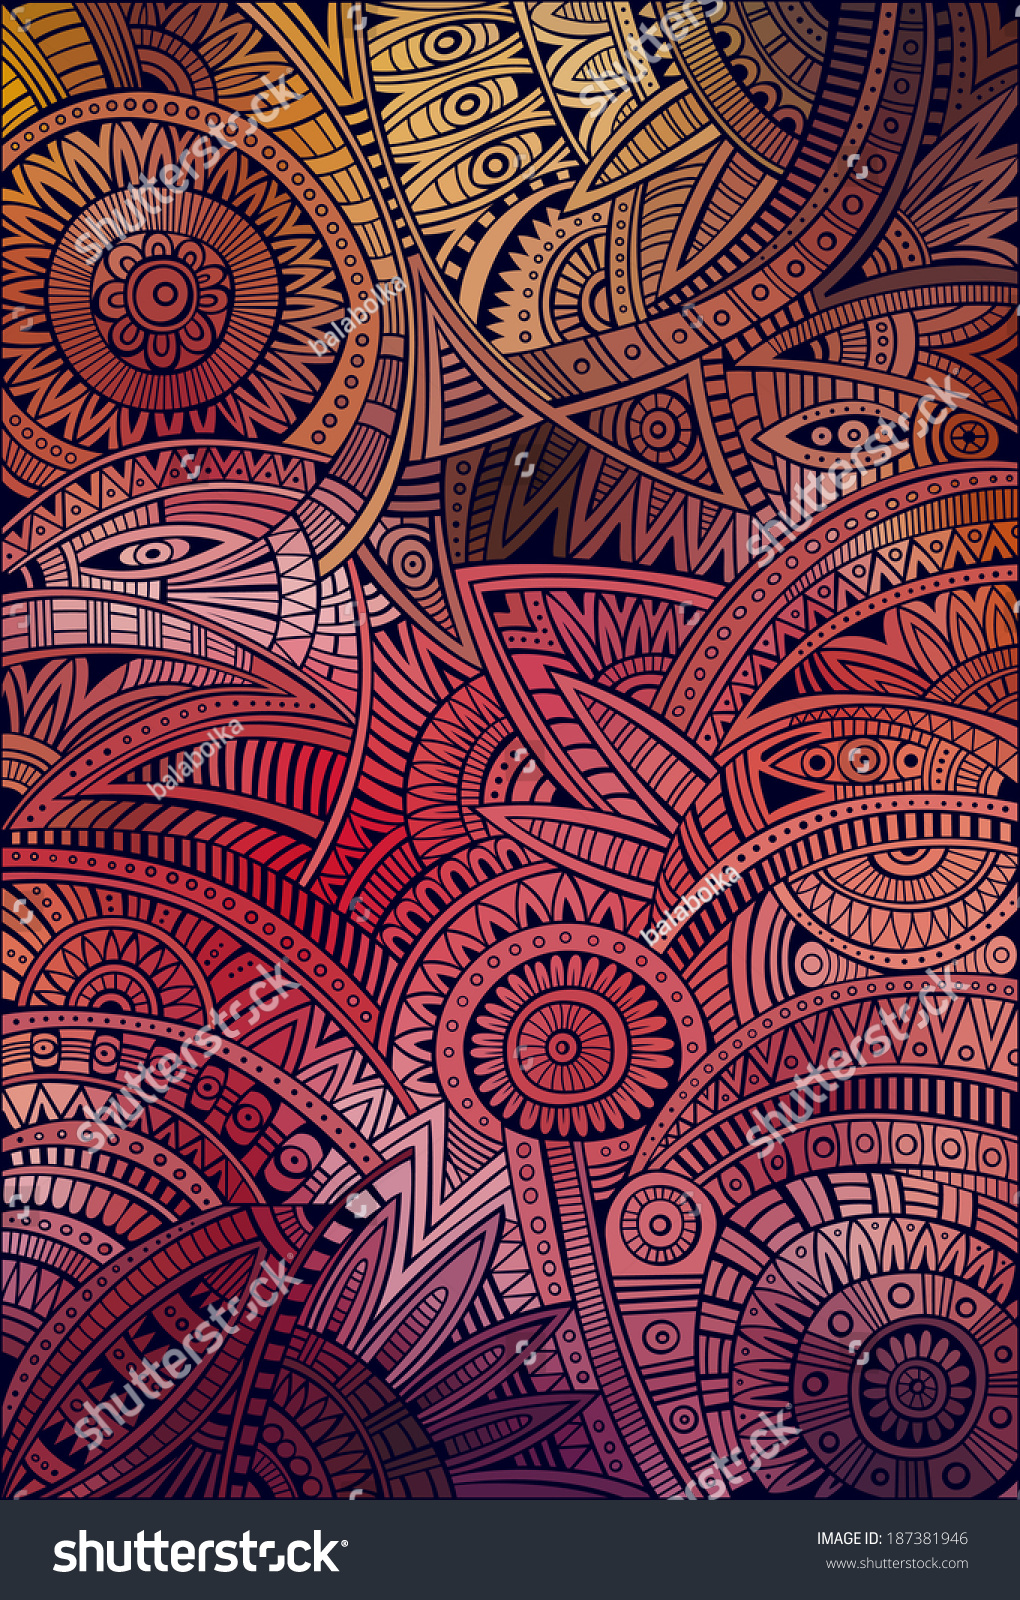 Abstract Vector Tribal Ethnic Background Pattern Stock Vector 187381946 ...